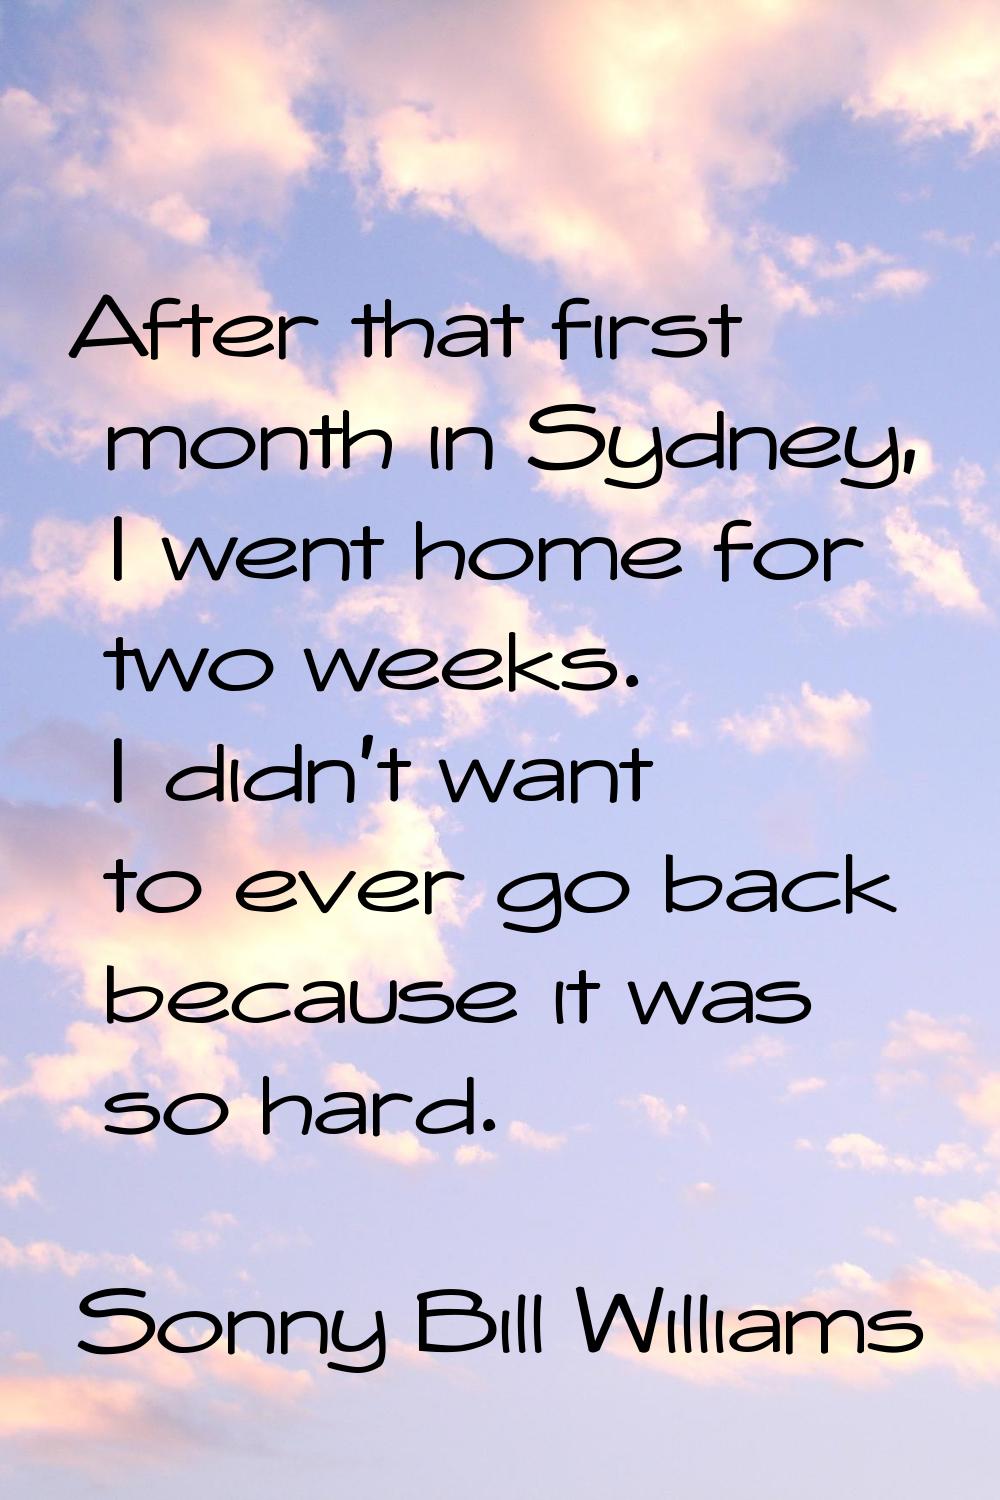 After that first month in Sydney, I went home for two weeks. I didn't want to ever go back because 